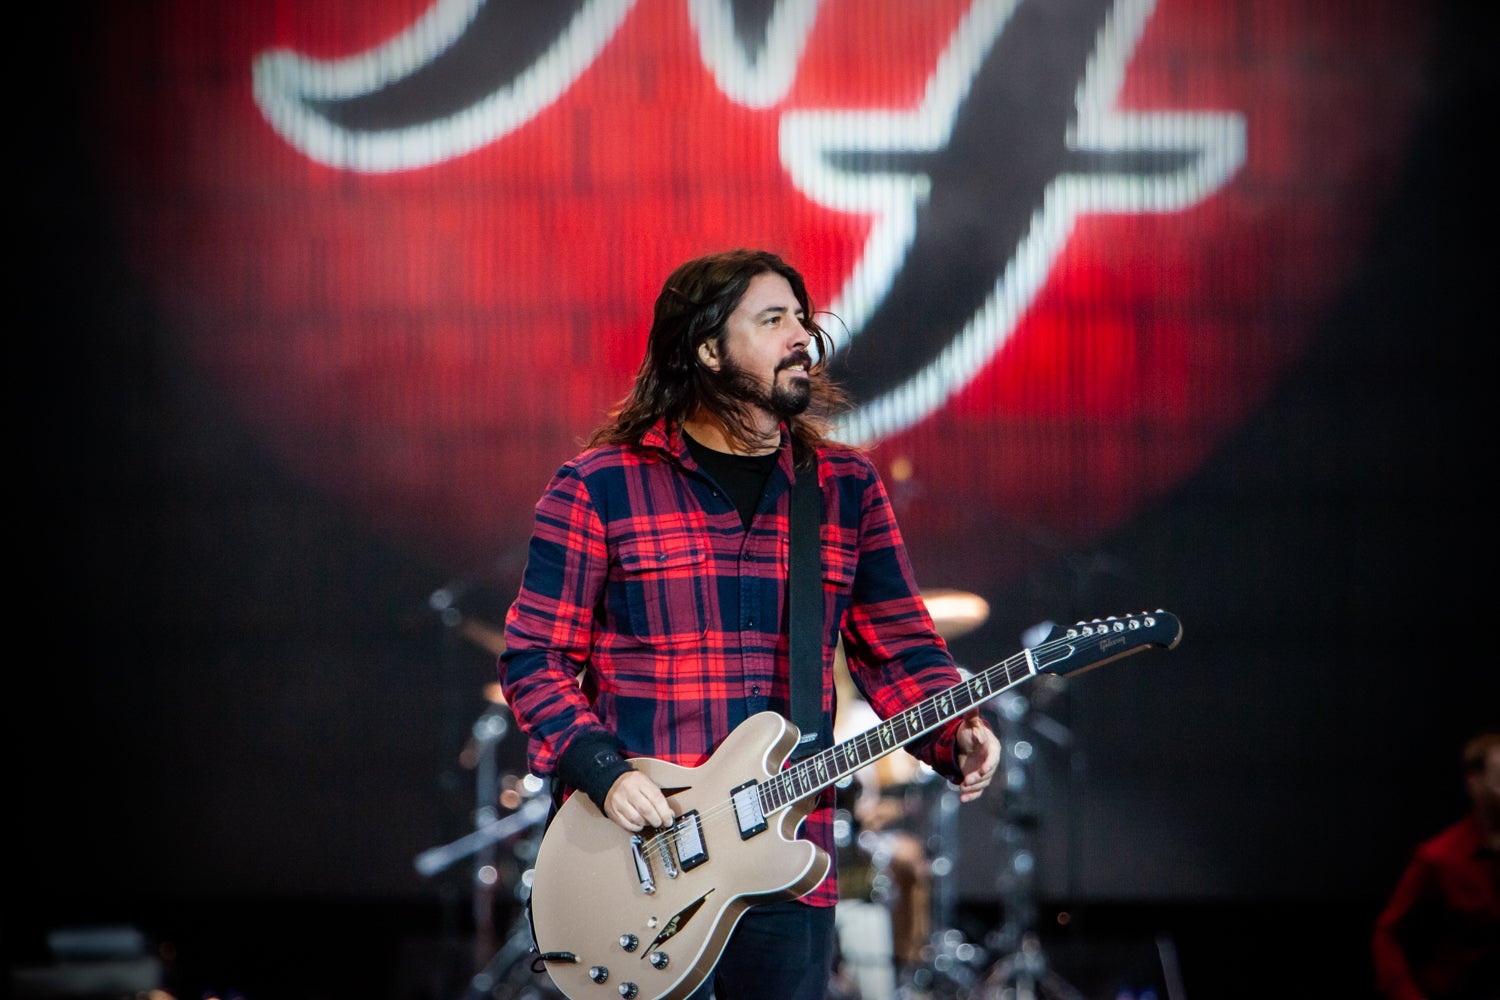 Dave Grohl gave an epic performance of Thin Lizzy’s Jailbreak during their crowd-rocking show